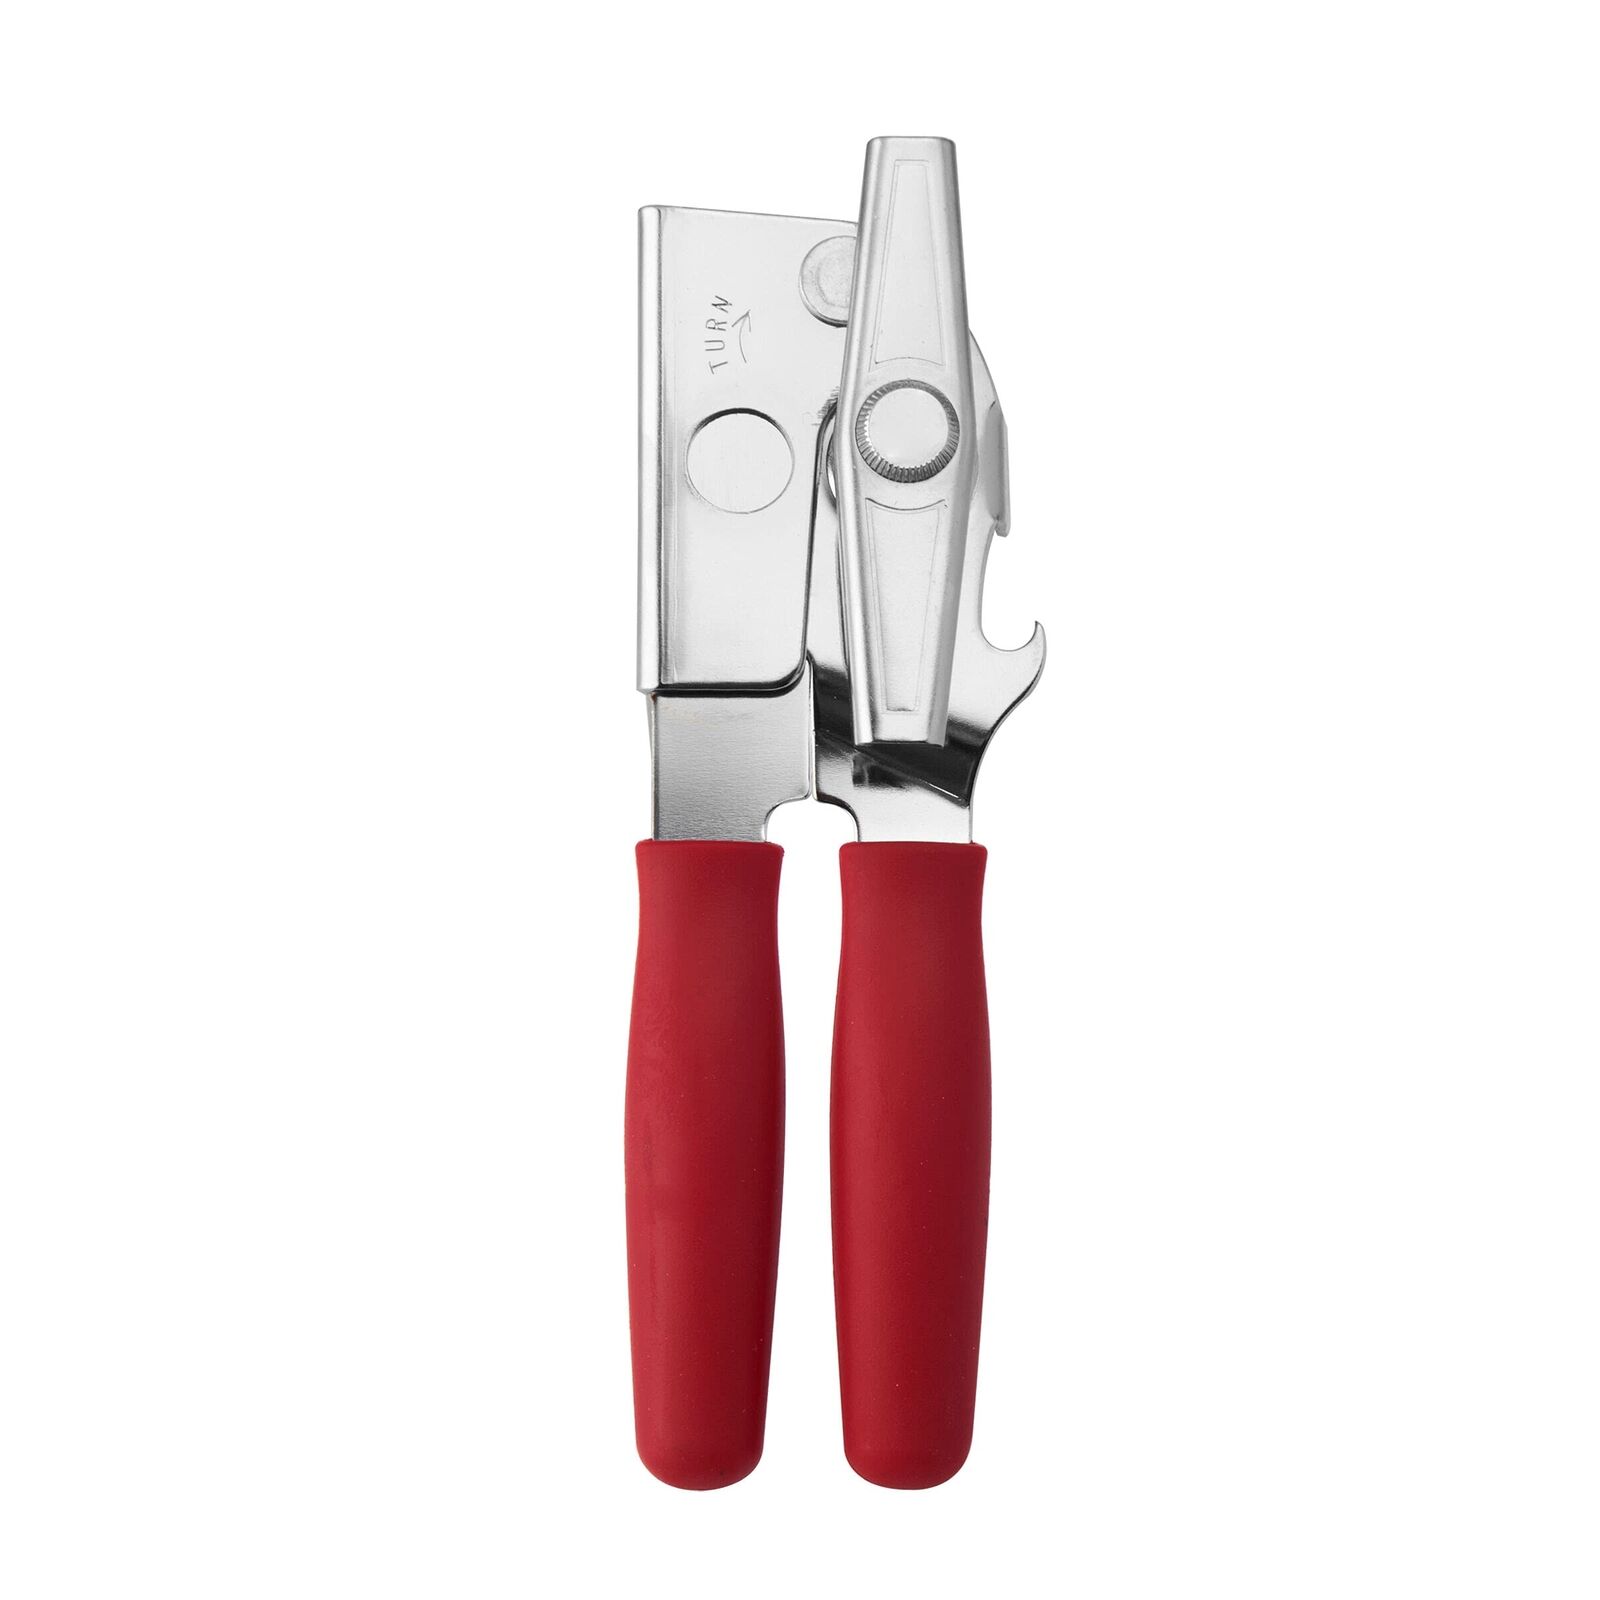 Swing-A-Way Portable Can Opener Features an Ergonimic Handle for Optimal Comf...